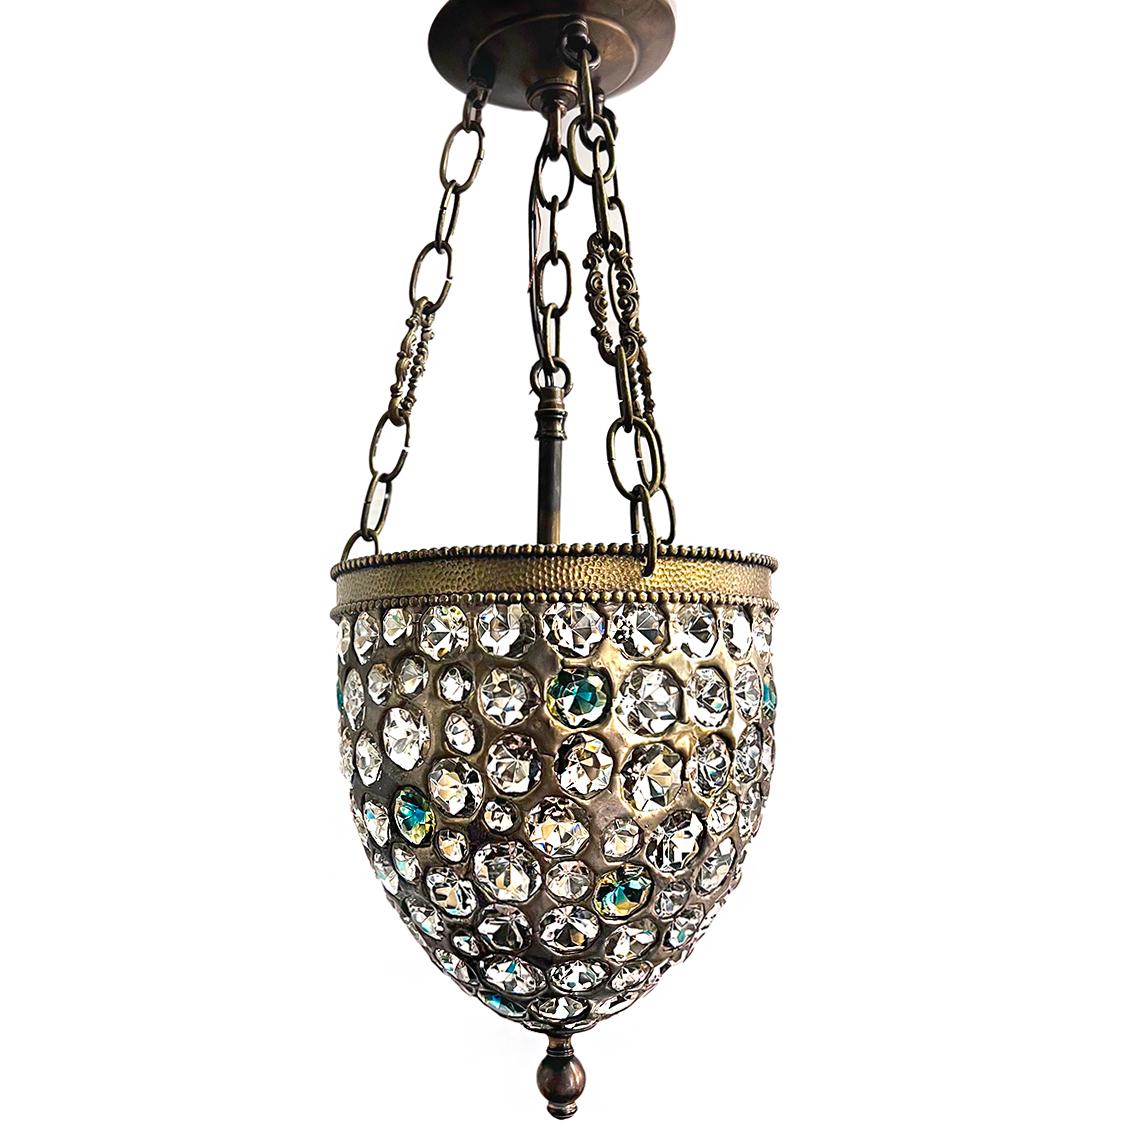 A circa late 1950s French lantern with green and clear crystals, original patina and three interior candelabra lights.

Measurements:
Height of body: 10.5